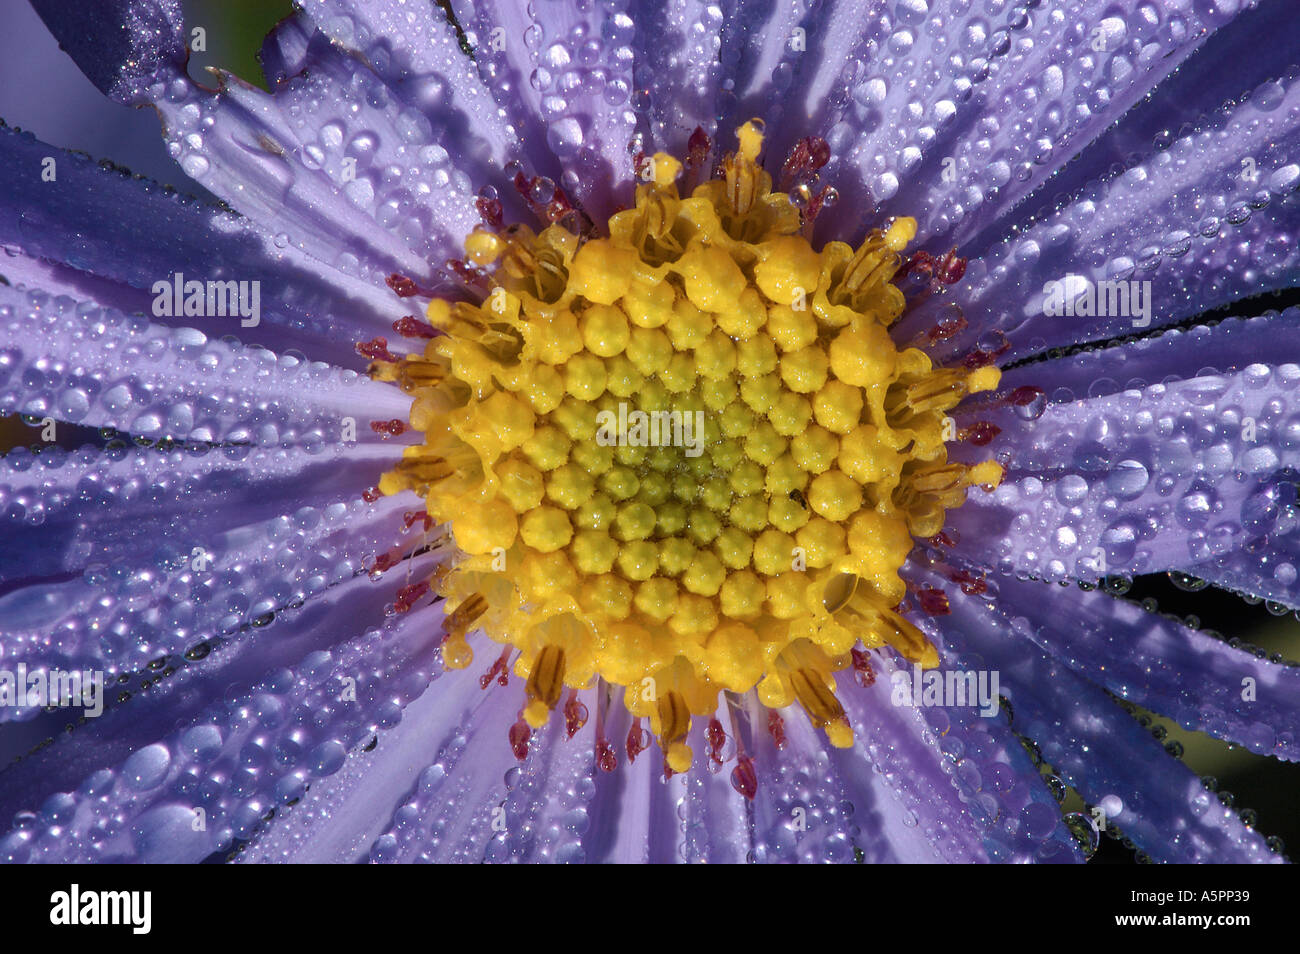 Bushy Aster blossom with drops of water Aster dumosus Herbst Aster Bluete mit Wassertropfen Stock Photo